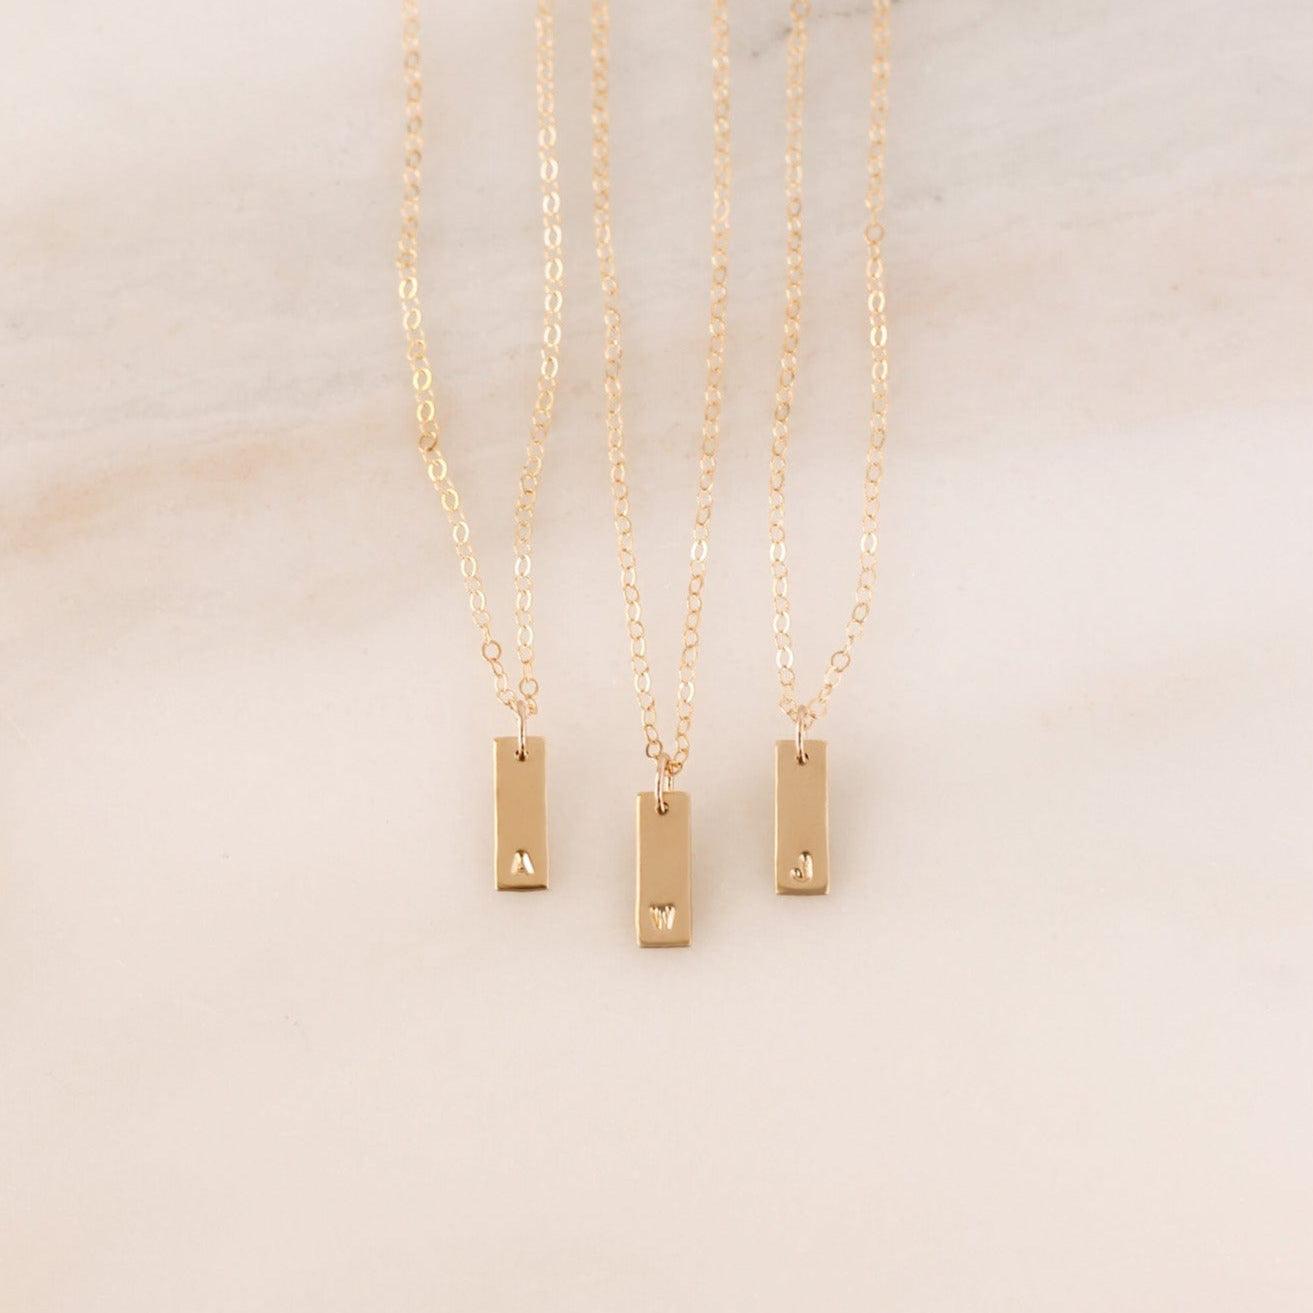 Slim Initial Tag Necklace - Nolia Jewelry - Meaningful + Sustainably Handcrafted Jewelry